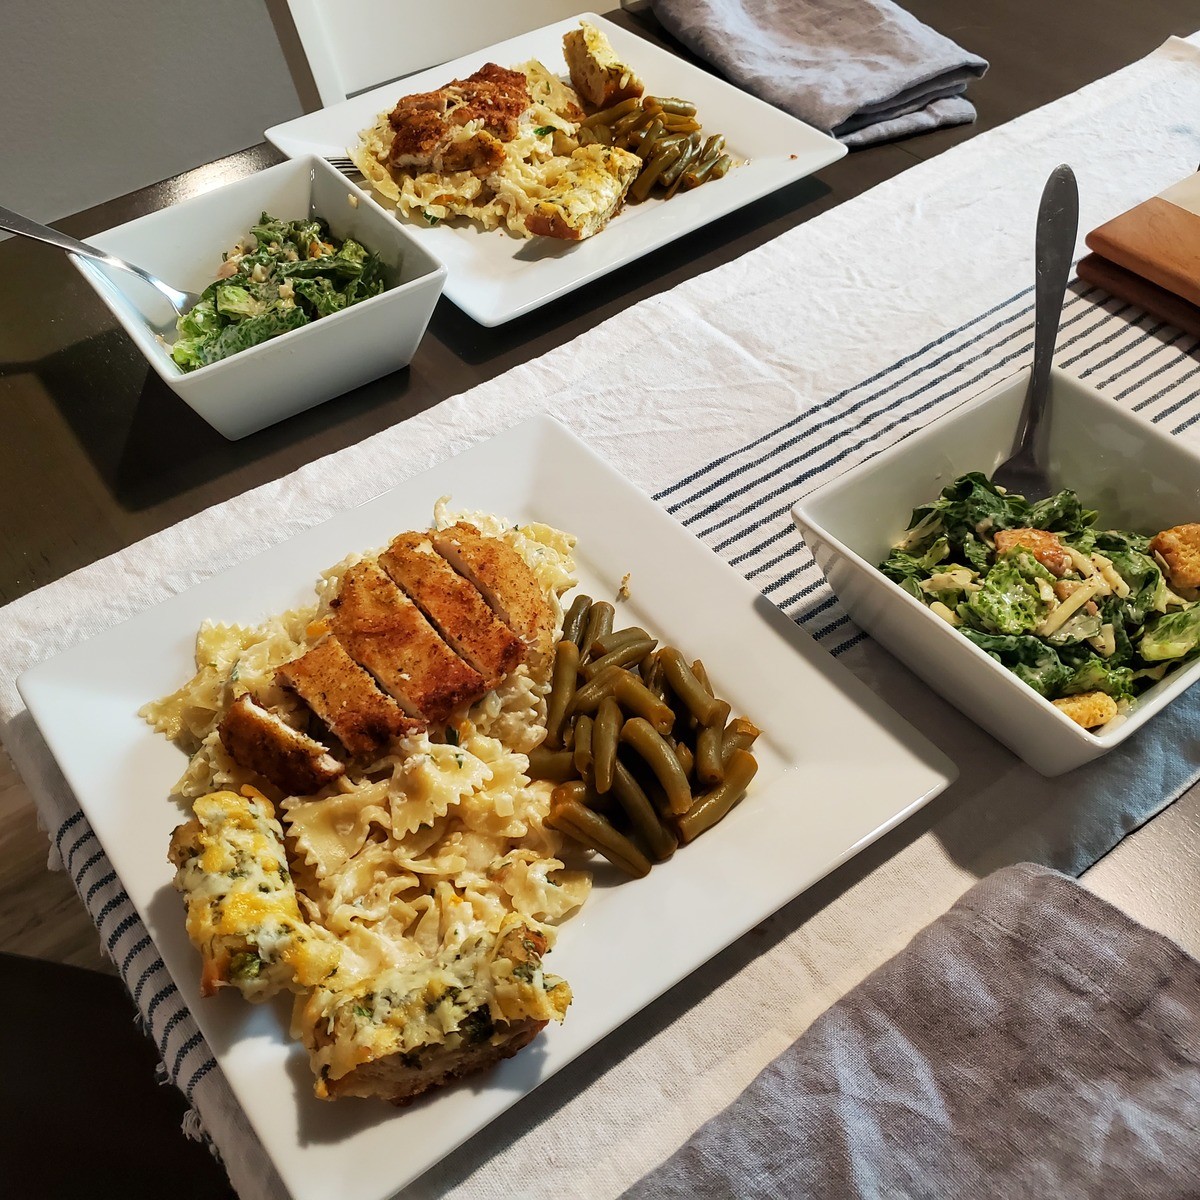 Made some pasta. Southern style creamy parmesan chicken pasta with homemade garlic bread, green beans, and ceaser salad... dude i had to color correct your beans. they were making me nauseous.